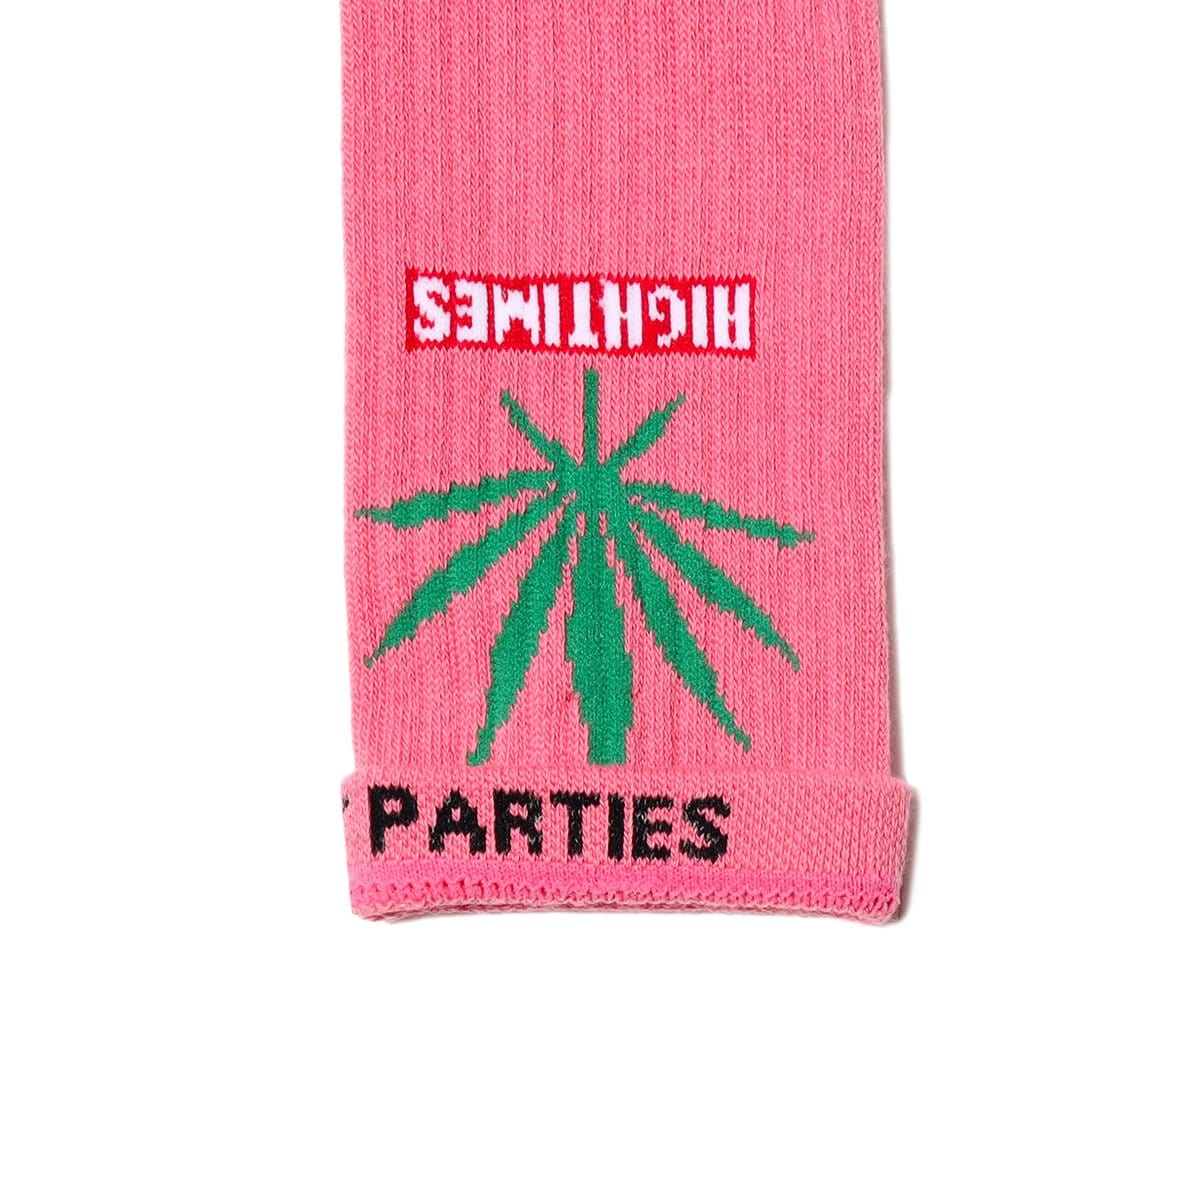 Wacko Maria Bags & Accessories PINK / OS HIGHTIMES / SKATER SOCKS (TYPE-2)